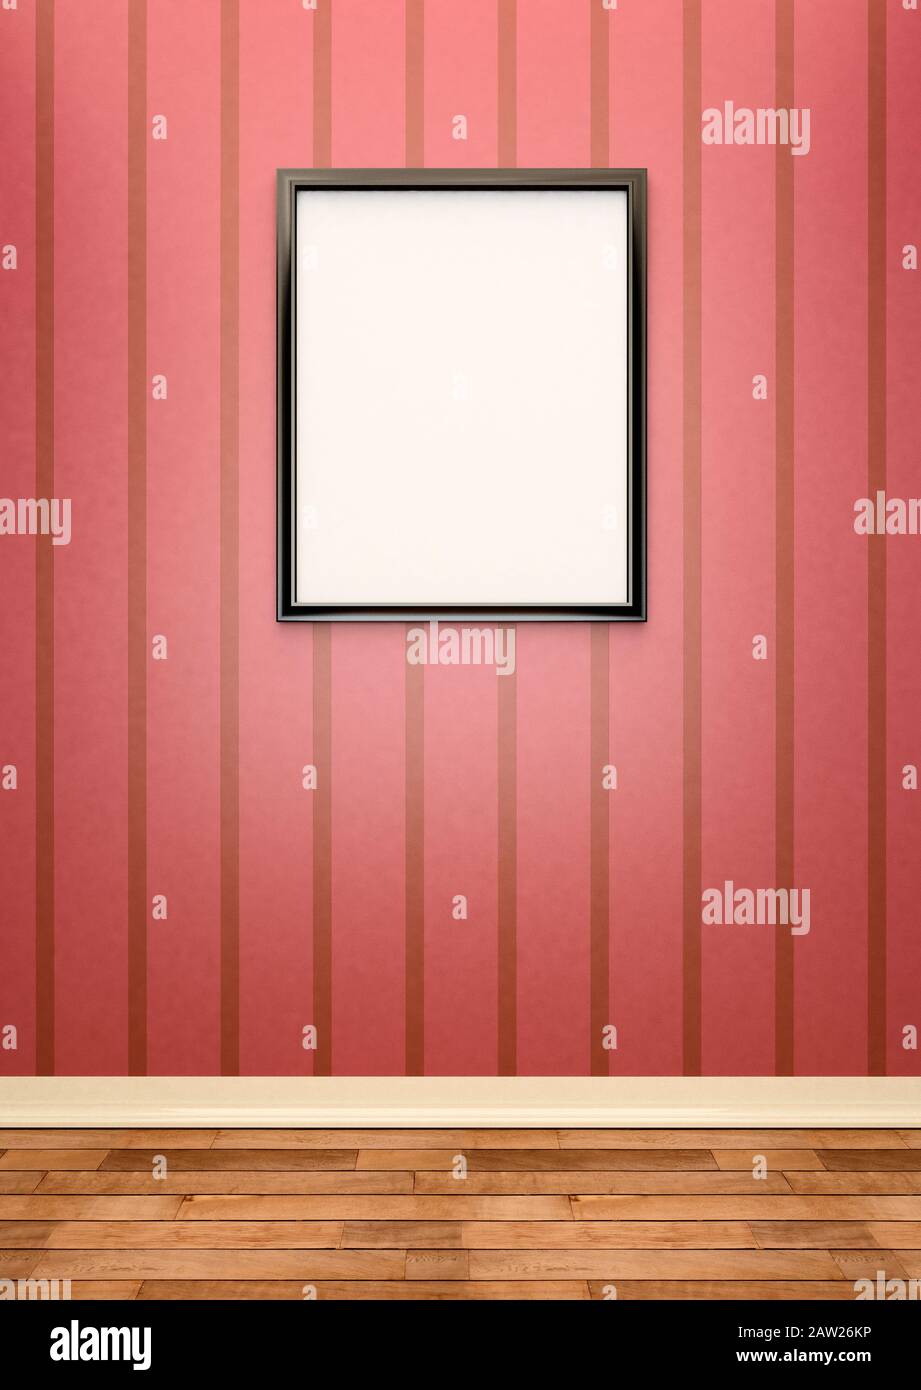 Large black blank picture frame on a red striped wall Stock Photo